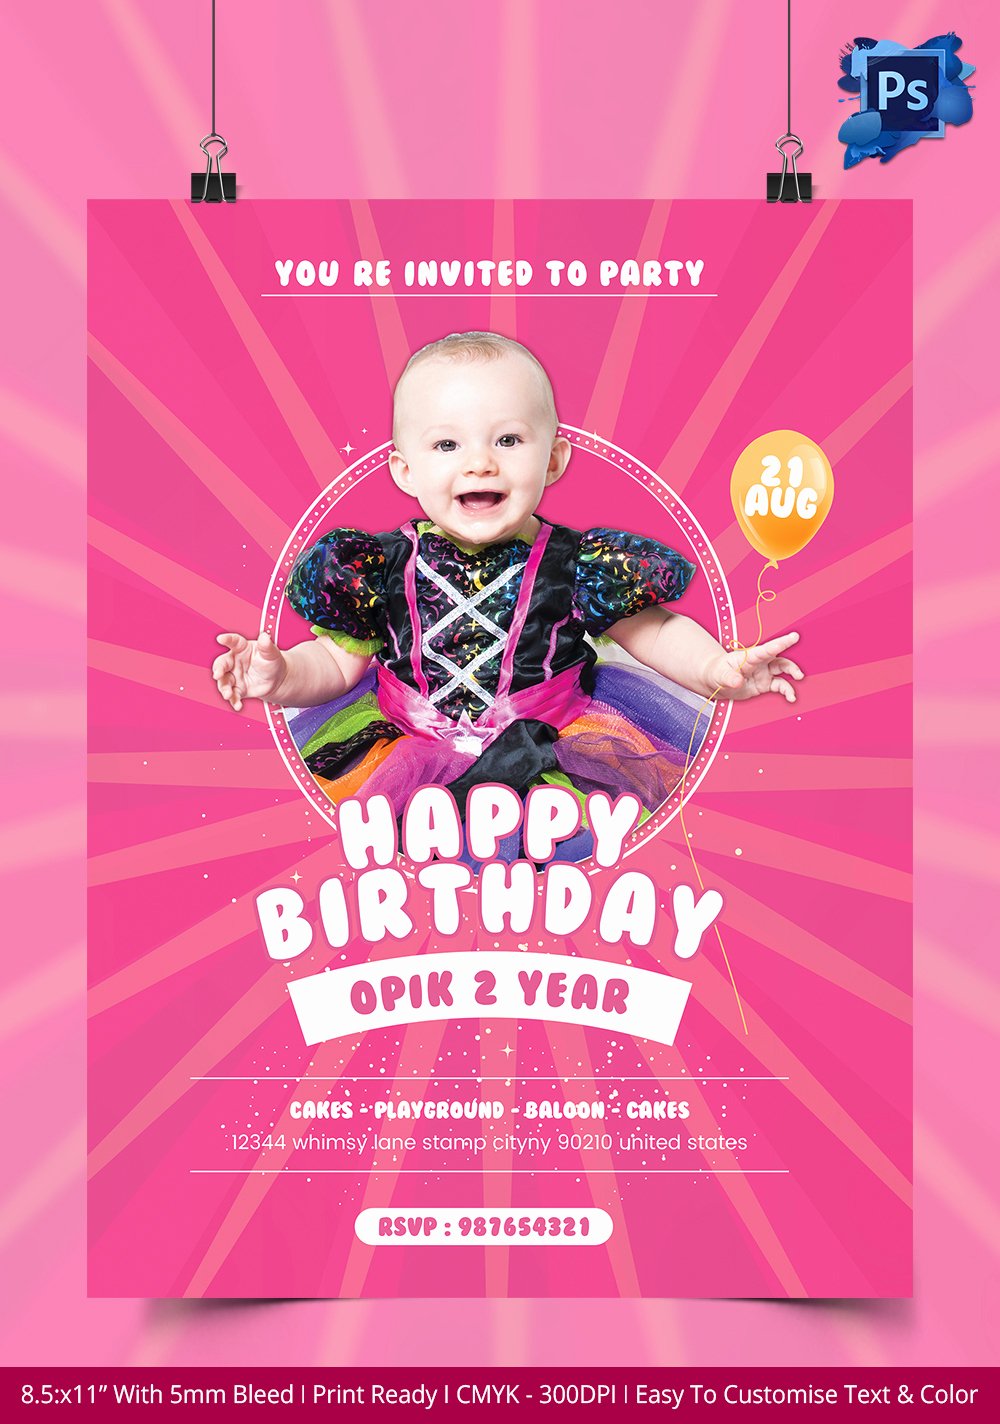 free birthday party flyer templates